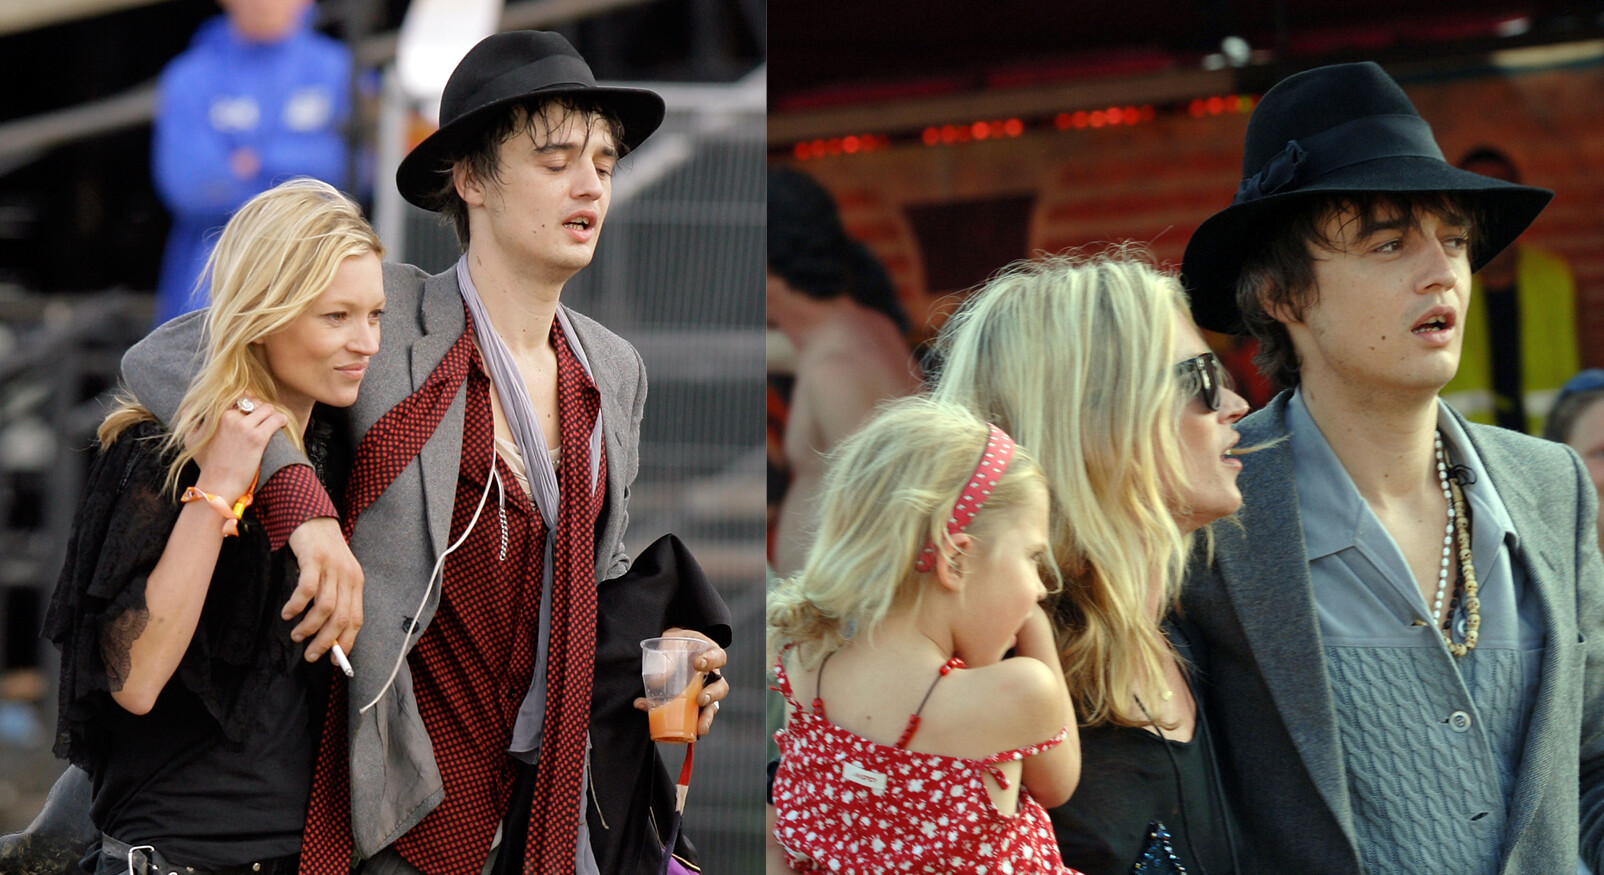 Kate Moss and Pete Doherty